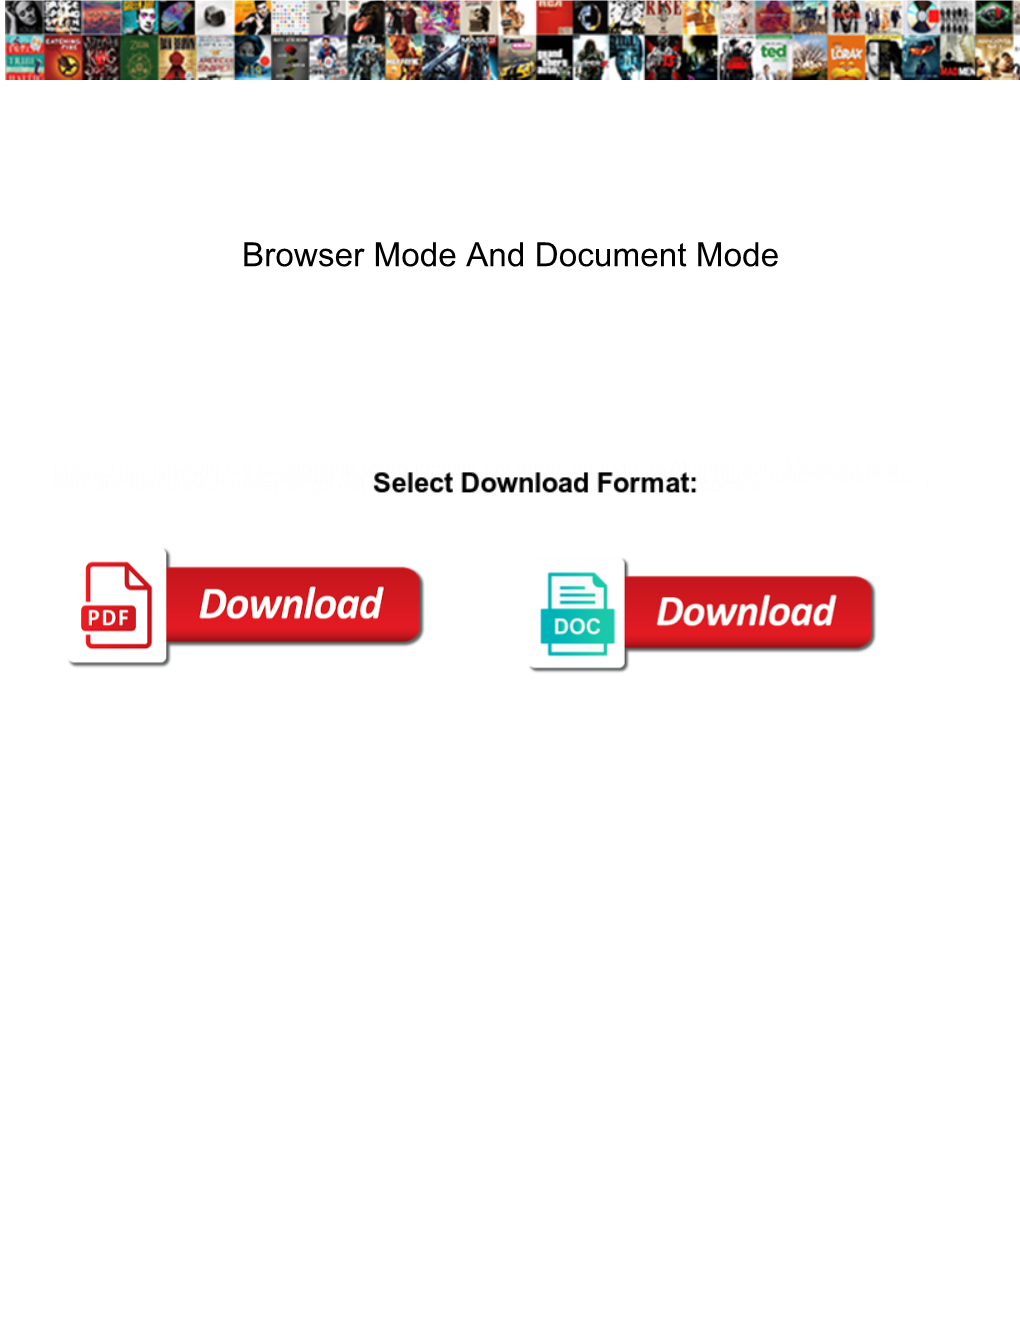 Browser Mode and Document Mode